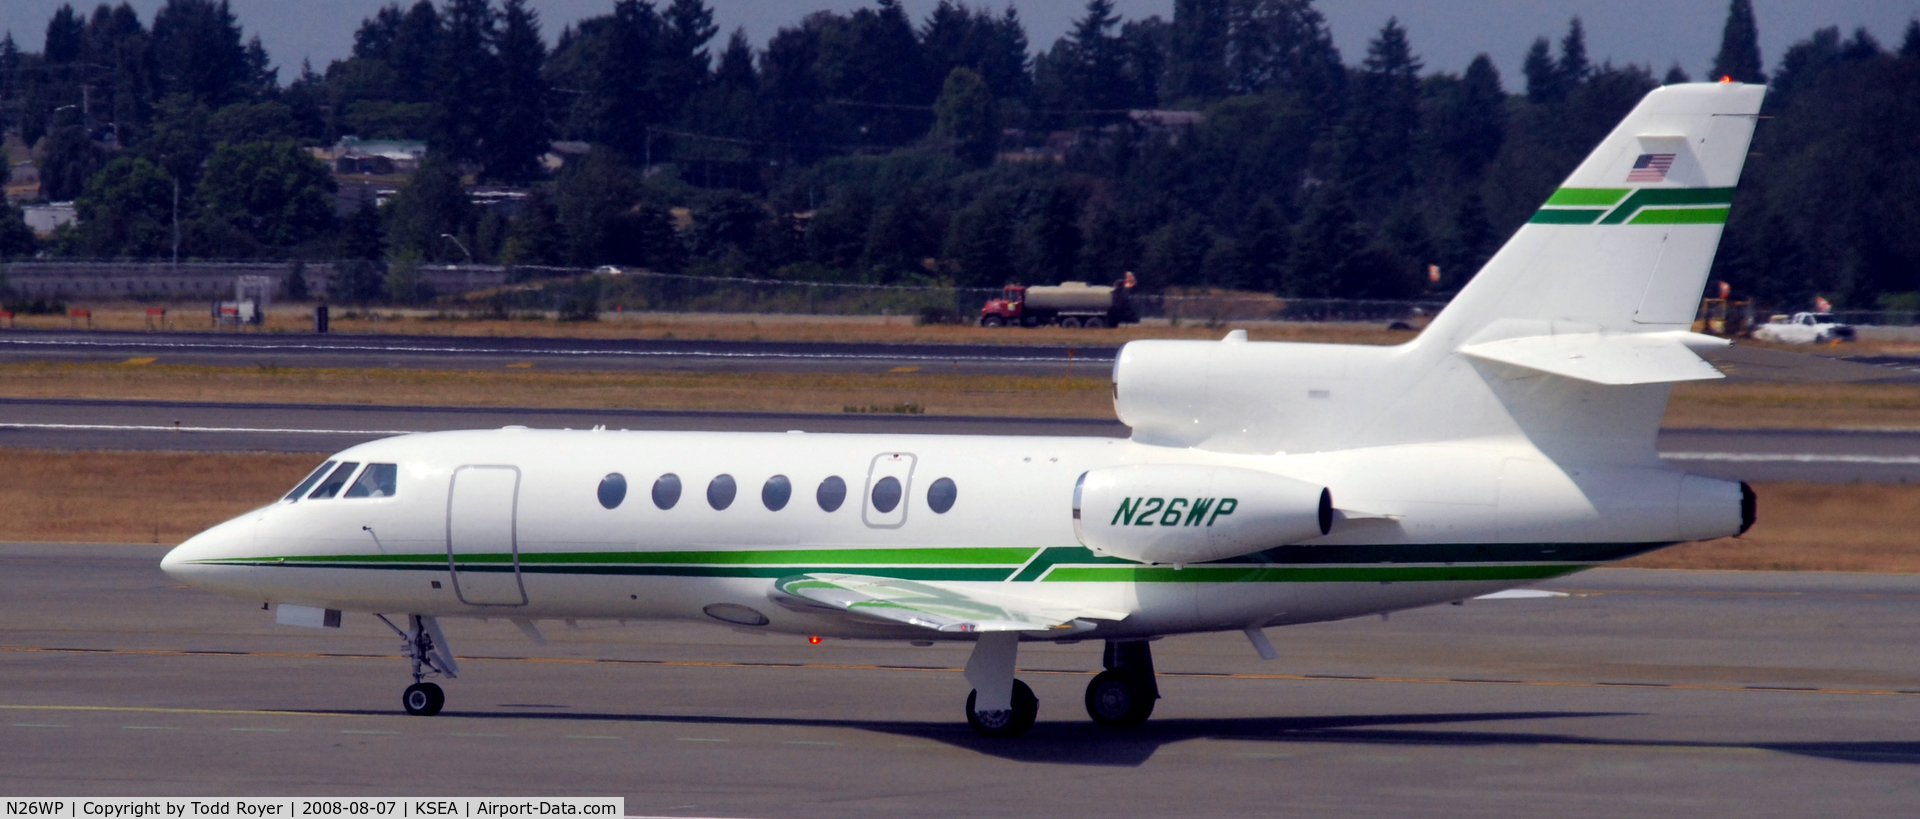 N26WP, 2001 Dassault Mystere Falcon 50 C/N 312, Taxi to gate